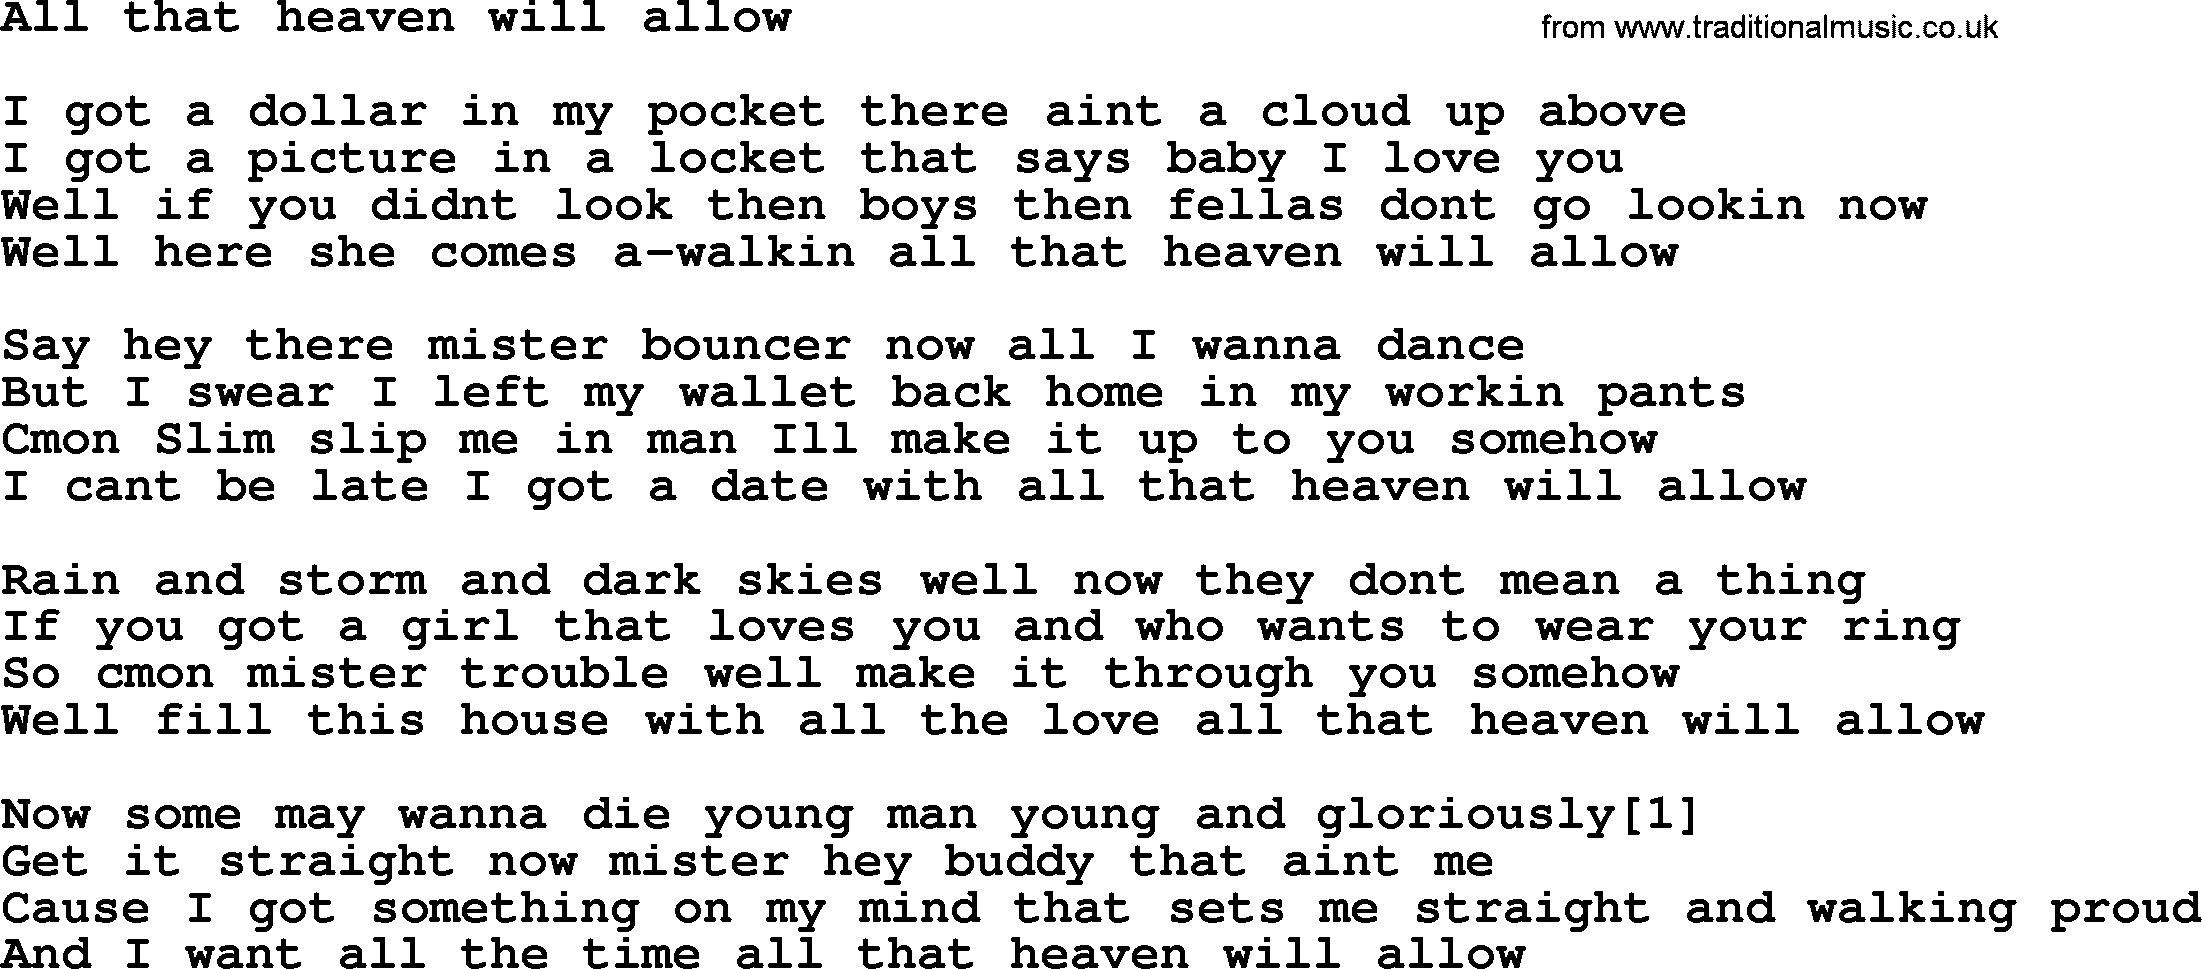 Bruce Springsteen song: All That Heaven Will Allow lyrics